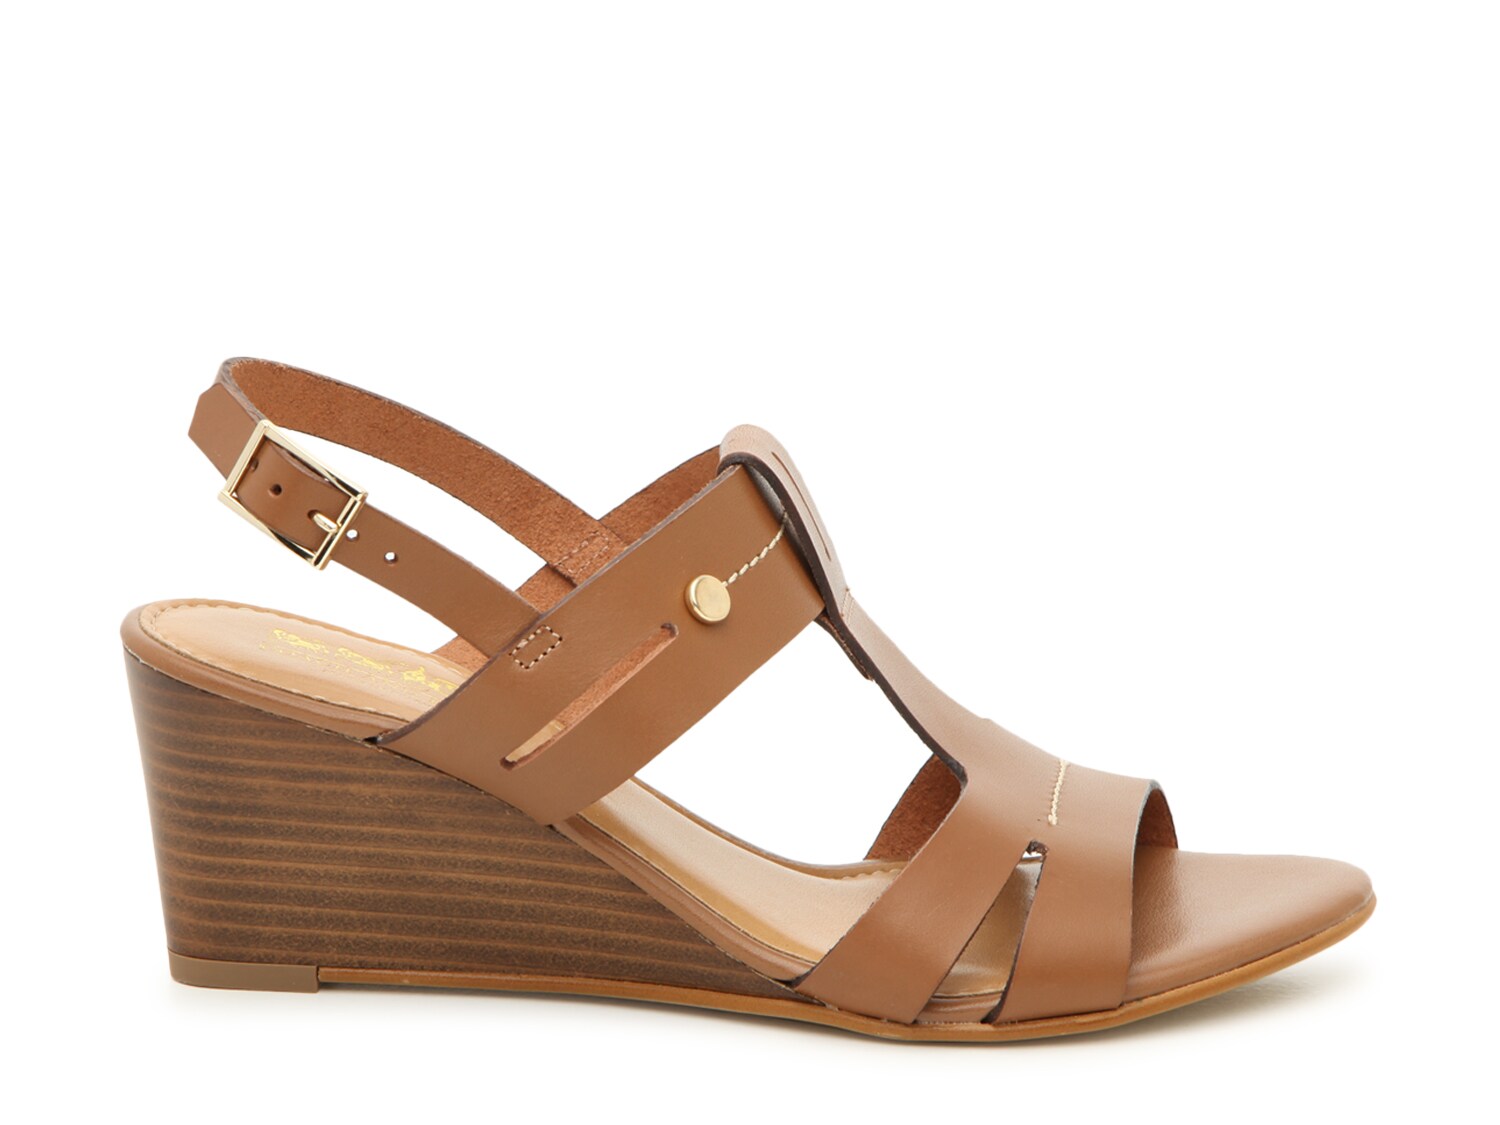 coach and four prato wedge sandal